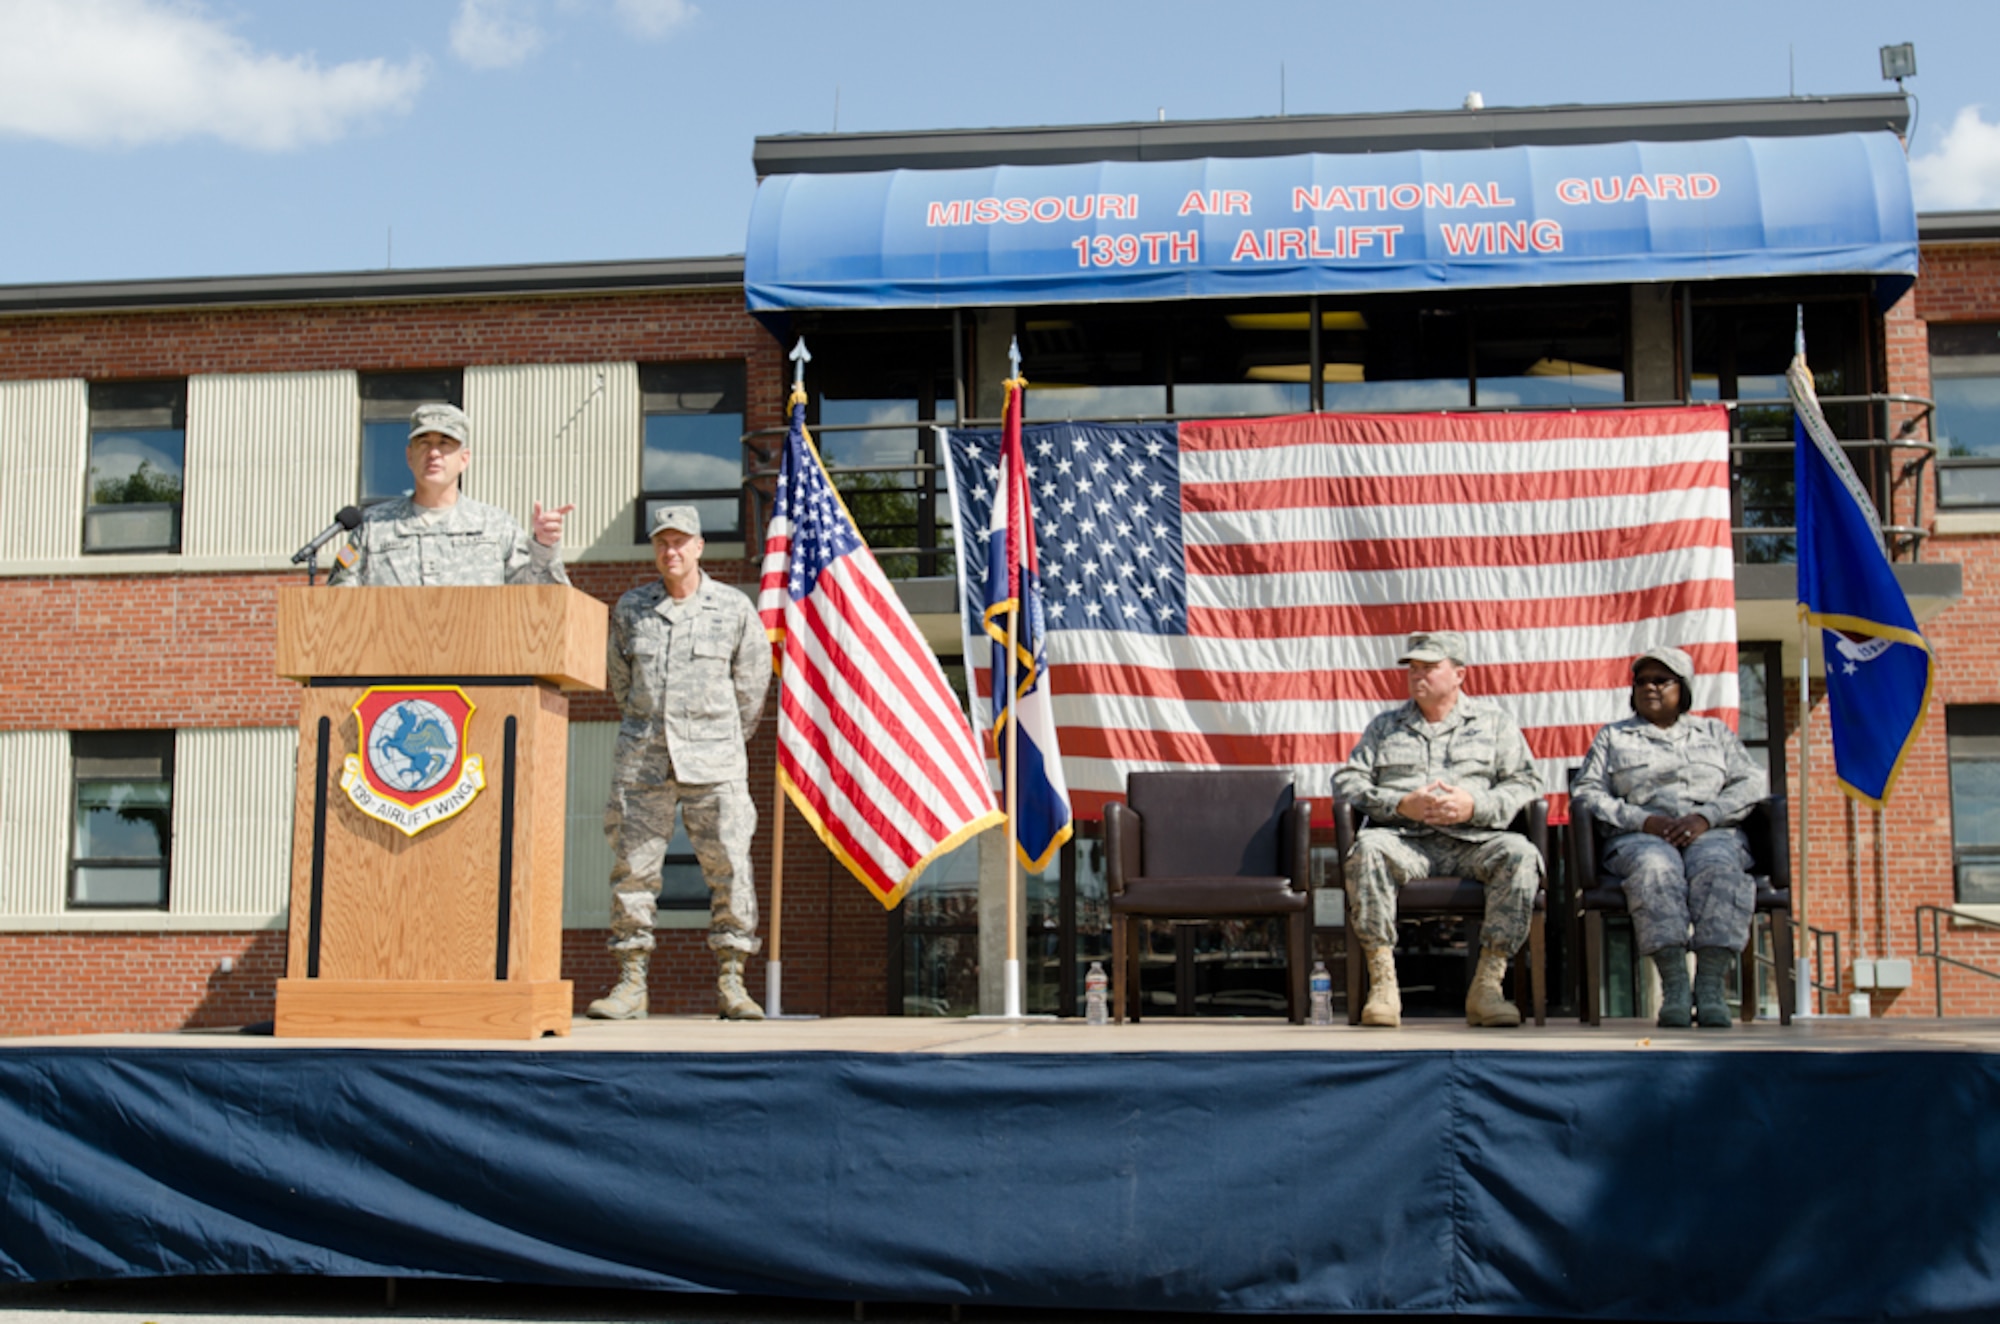 Maj. Gen. Stephen Danner, Missouri National Guard Adjutant General, speaks during the assumption of command on September 25, 2011 at Rosecrans Memorial Airport in Saint Joseph, Mo. Col. Pankau assumed command of the 139th becoming the 10th commander. (U.S. Air Force photo by Senior Airman Sheldon Thompson)